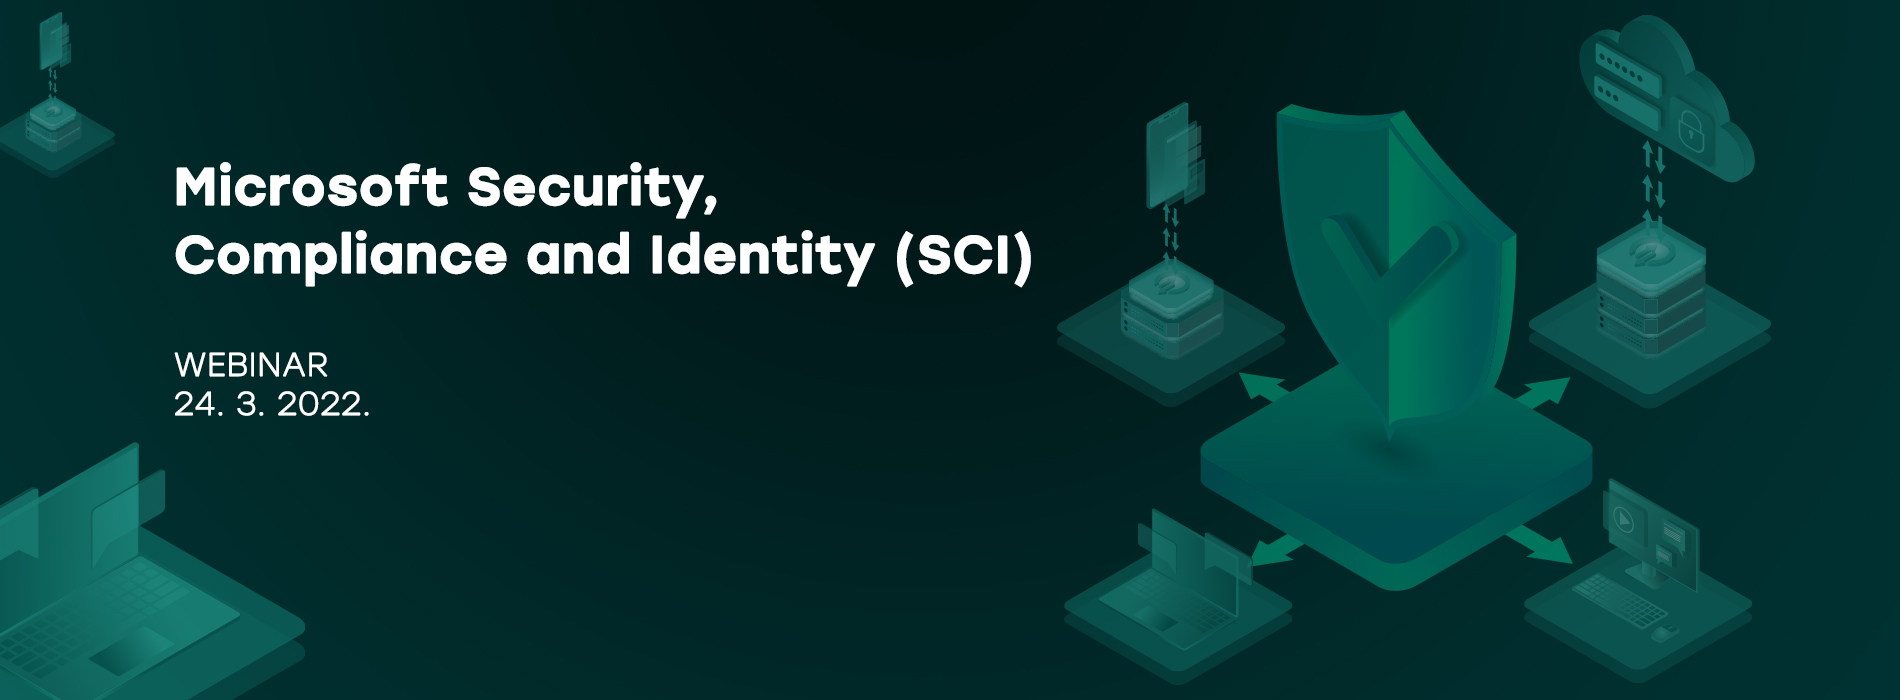 Image for Microsoft Security, Compliance and Identity (SCI)